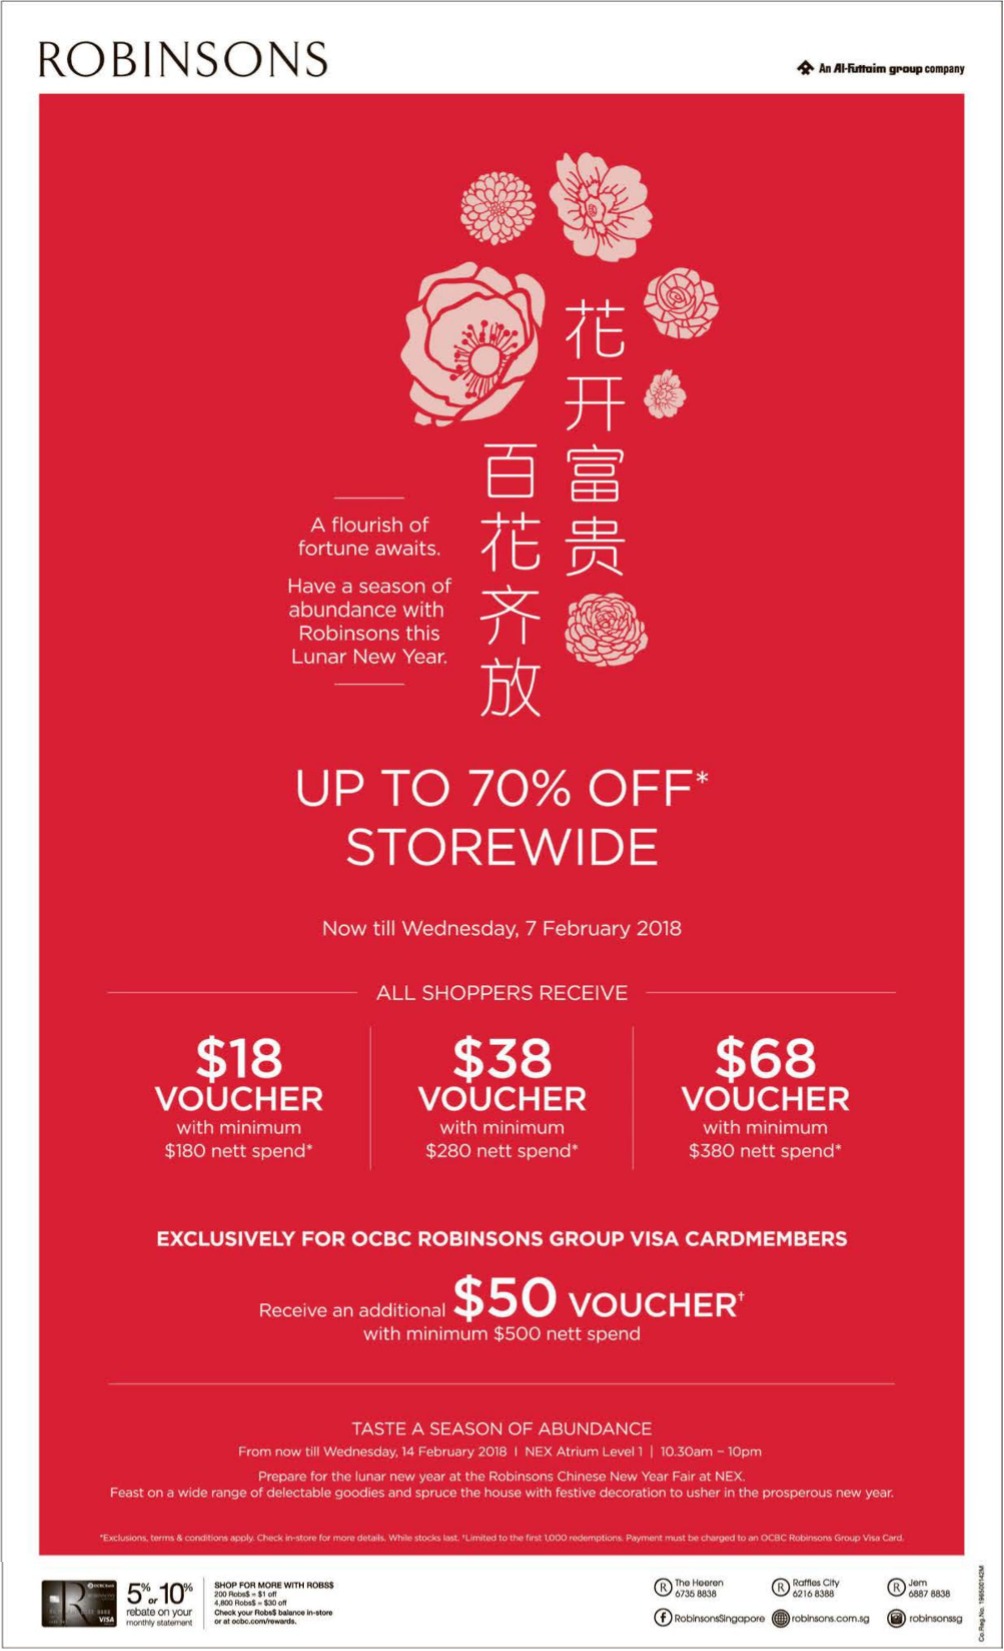 Robinsons Chinese New Year Sale is on! Enjoy up to 70{43c154d03bc8d6f3a2e02120576efea76bd463bd1d9aa7d45f68c7a169d43d05} off storewide from 2 – 14 Feb 2018 - 1